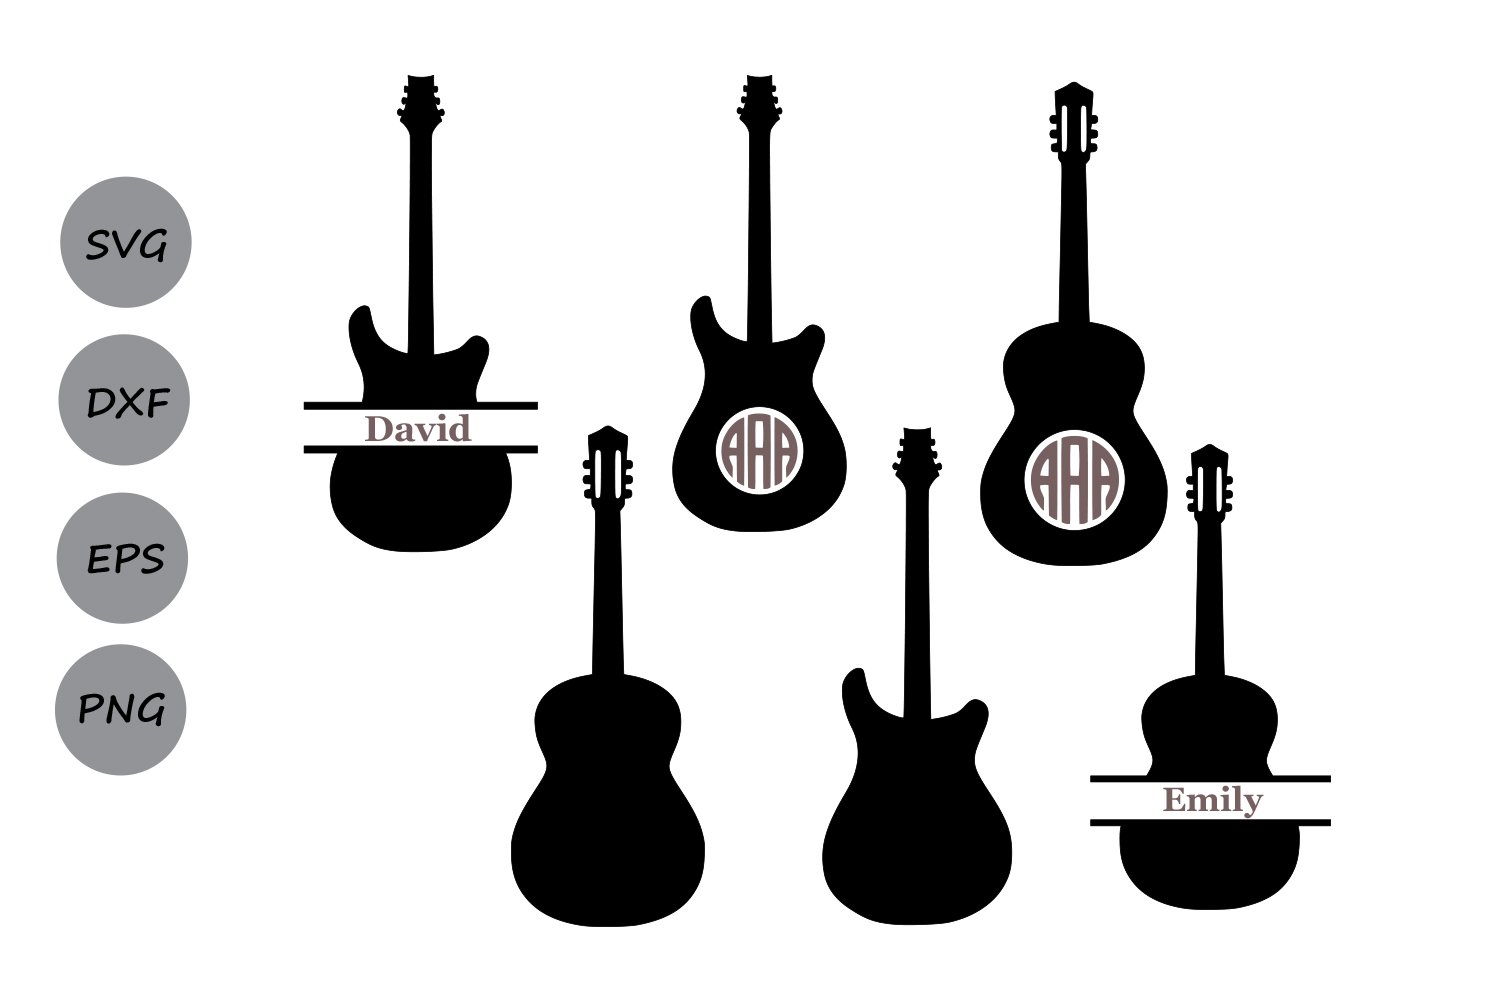 Many different guitars are suggested.